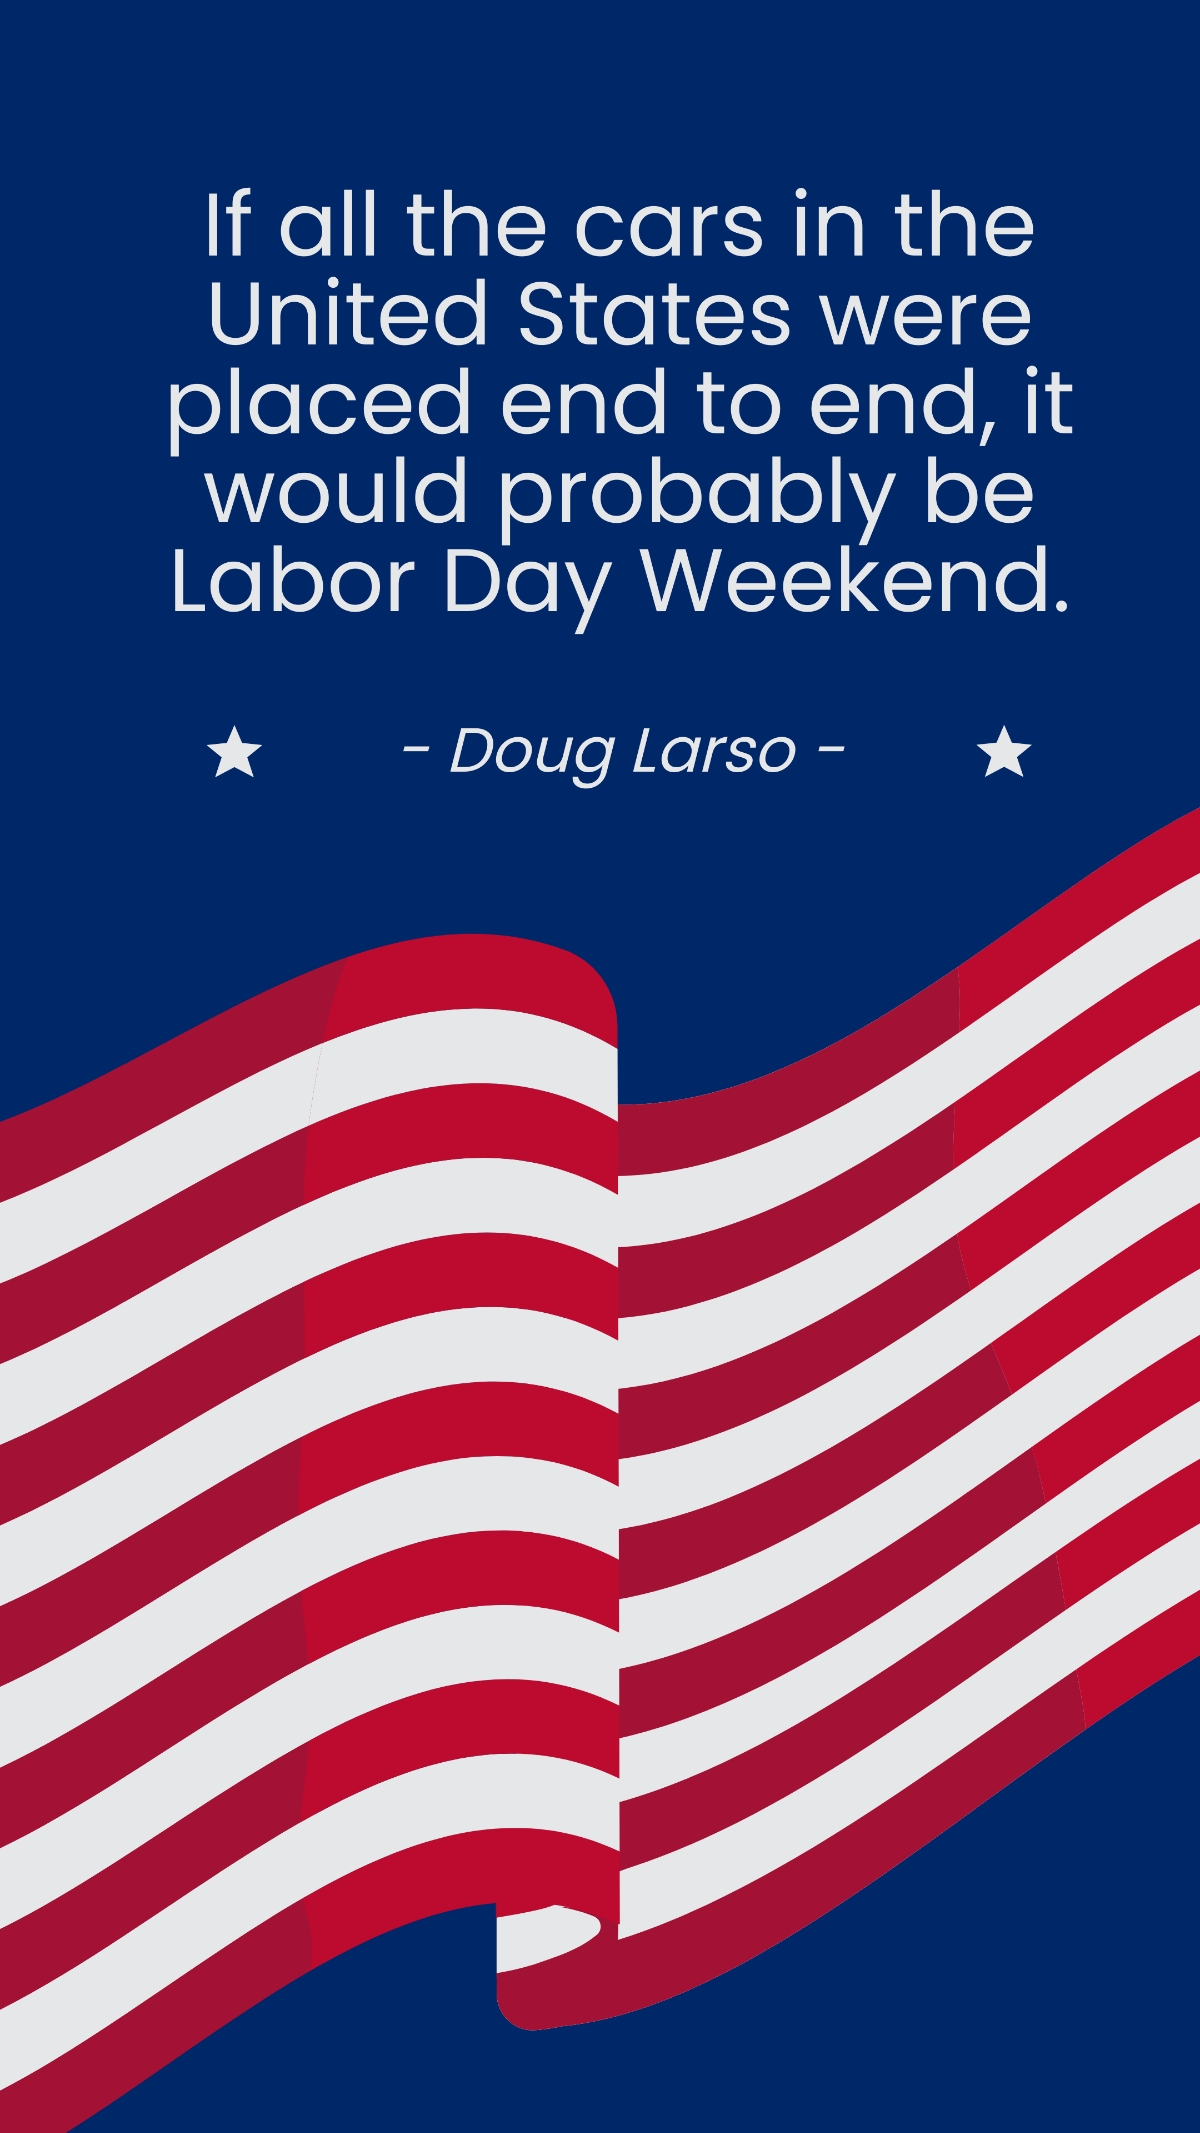 Doug Larso - If all the cars in the United States were placed end to end, it would probably be Labor Day Weekend. Template